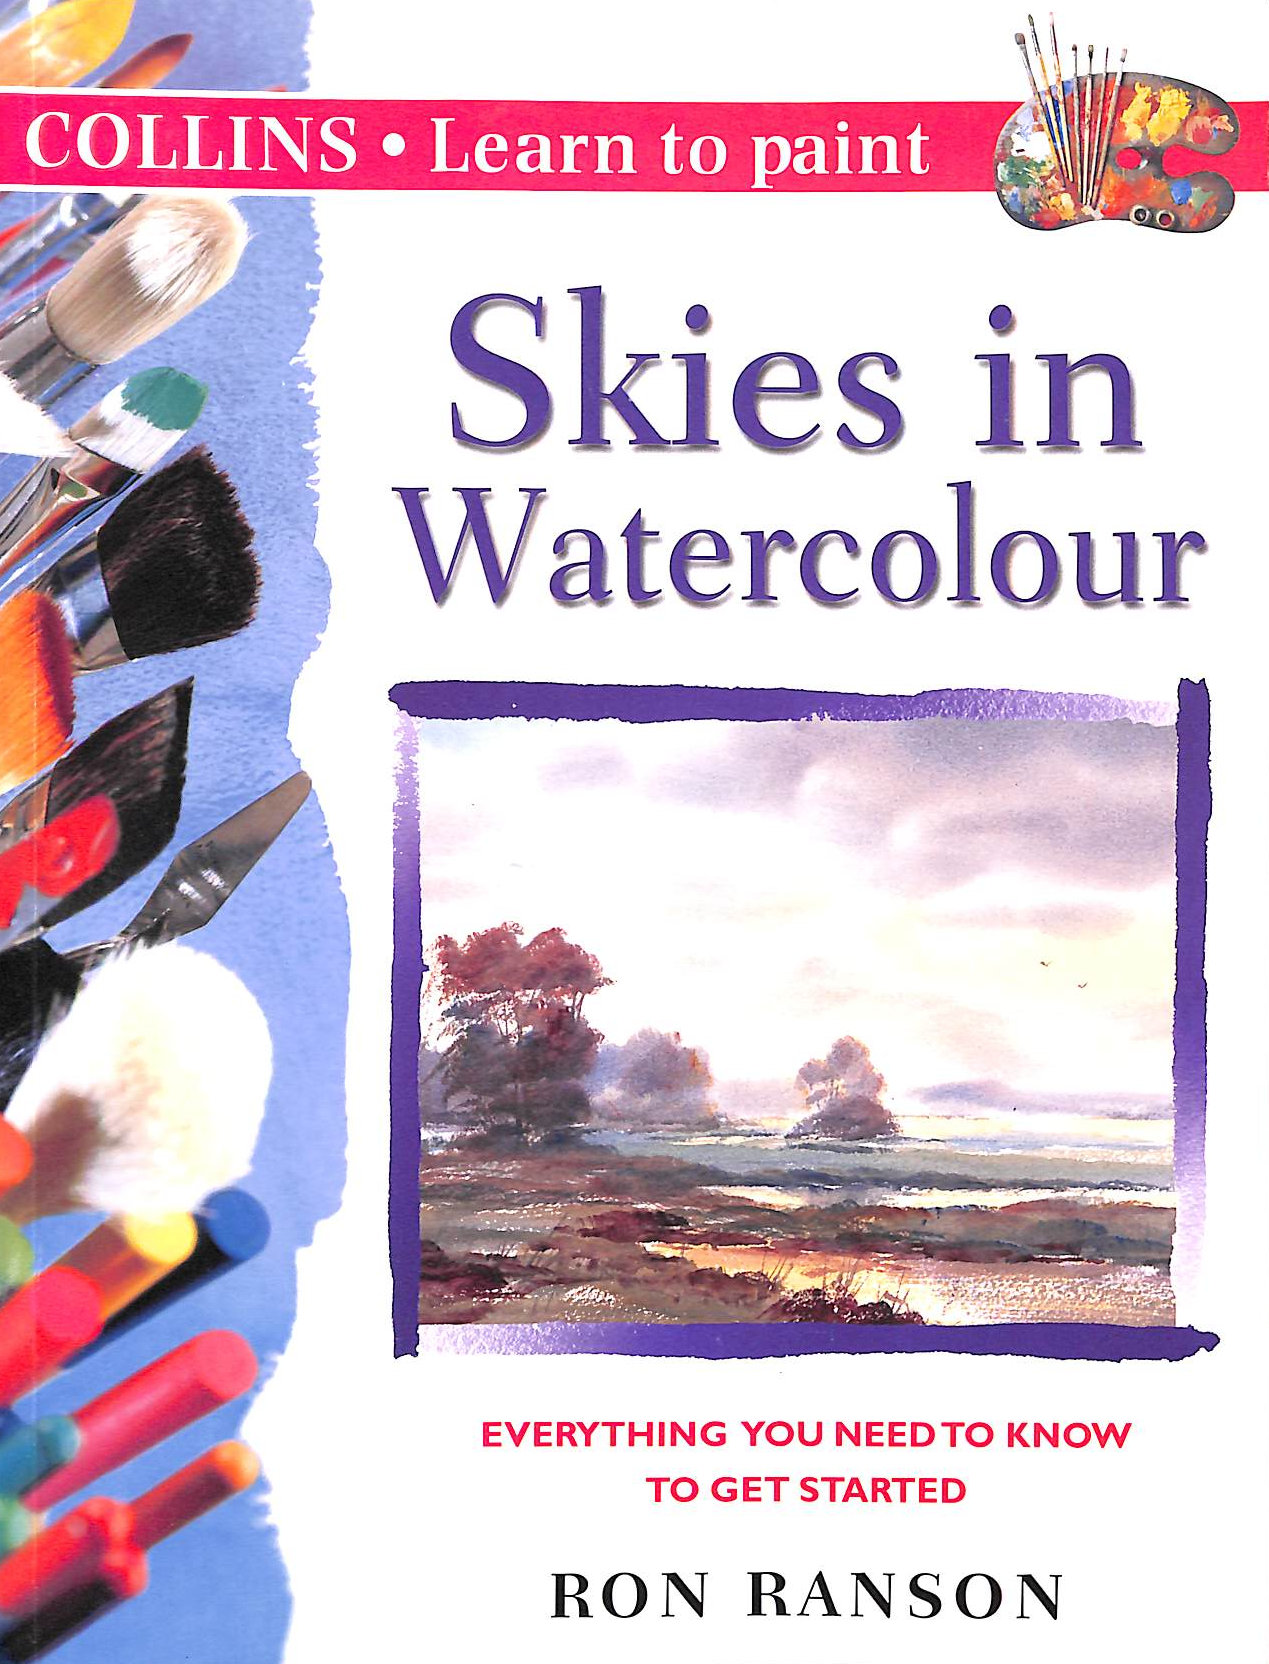 RANSON, RON - Collins Learn to Paint, Skies in Watercolour: No. 16